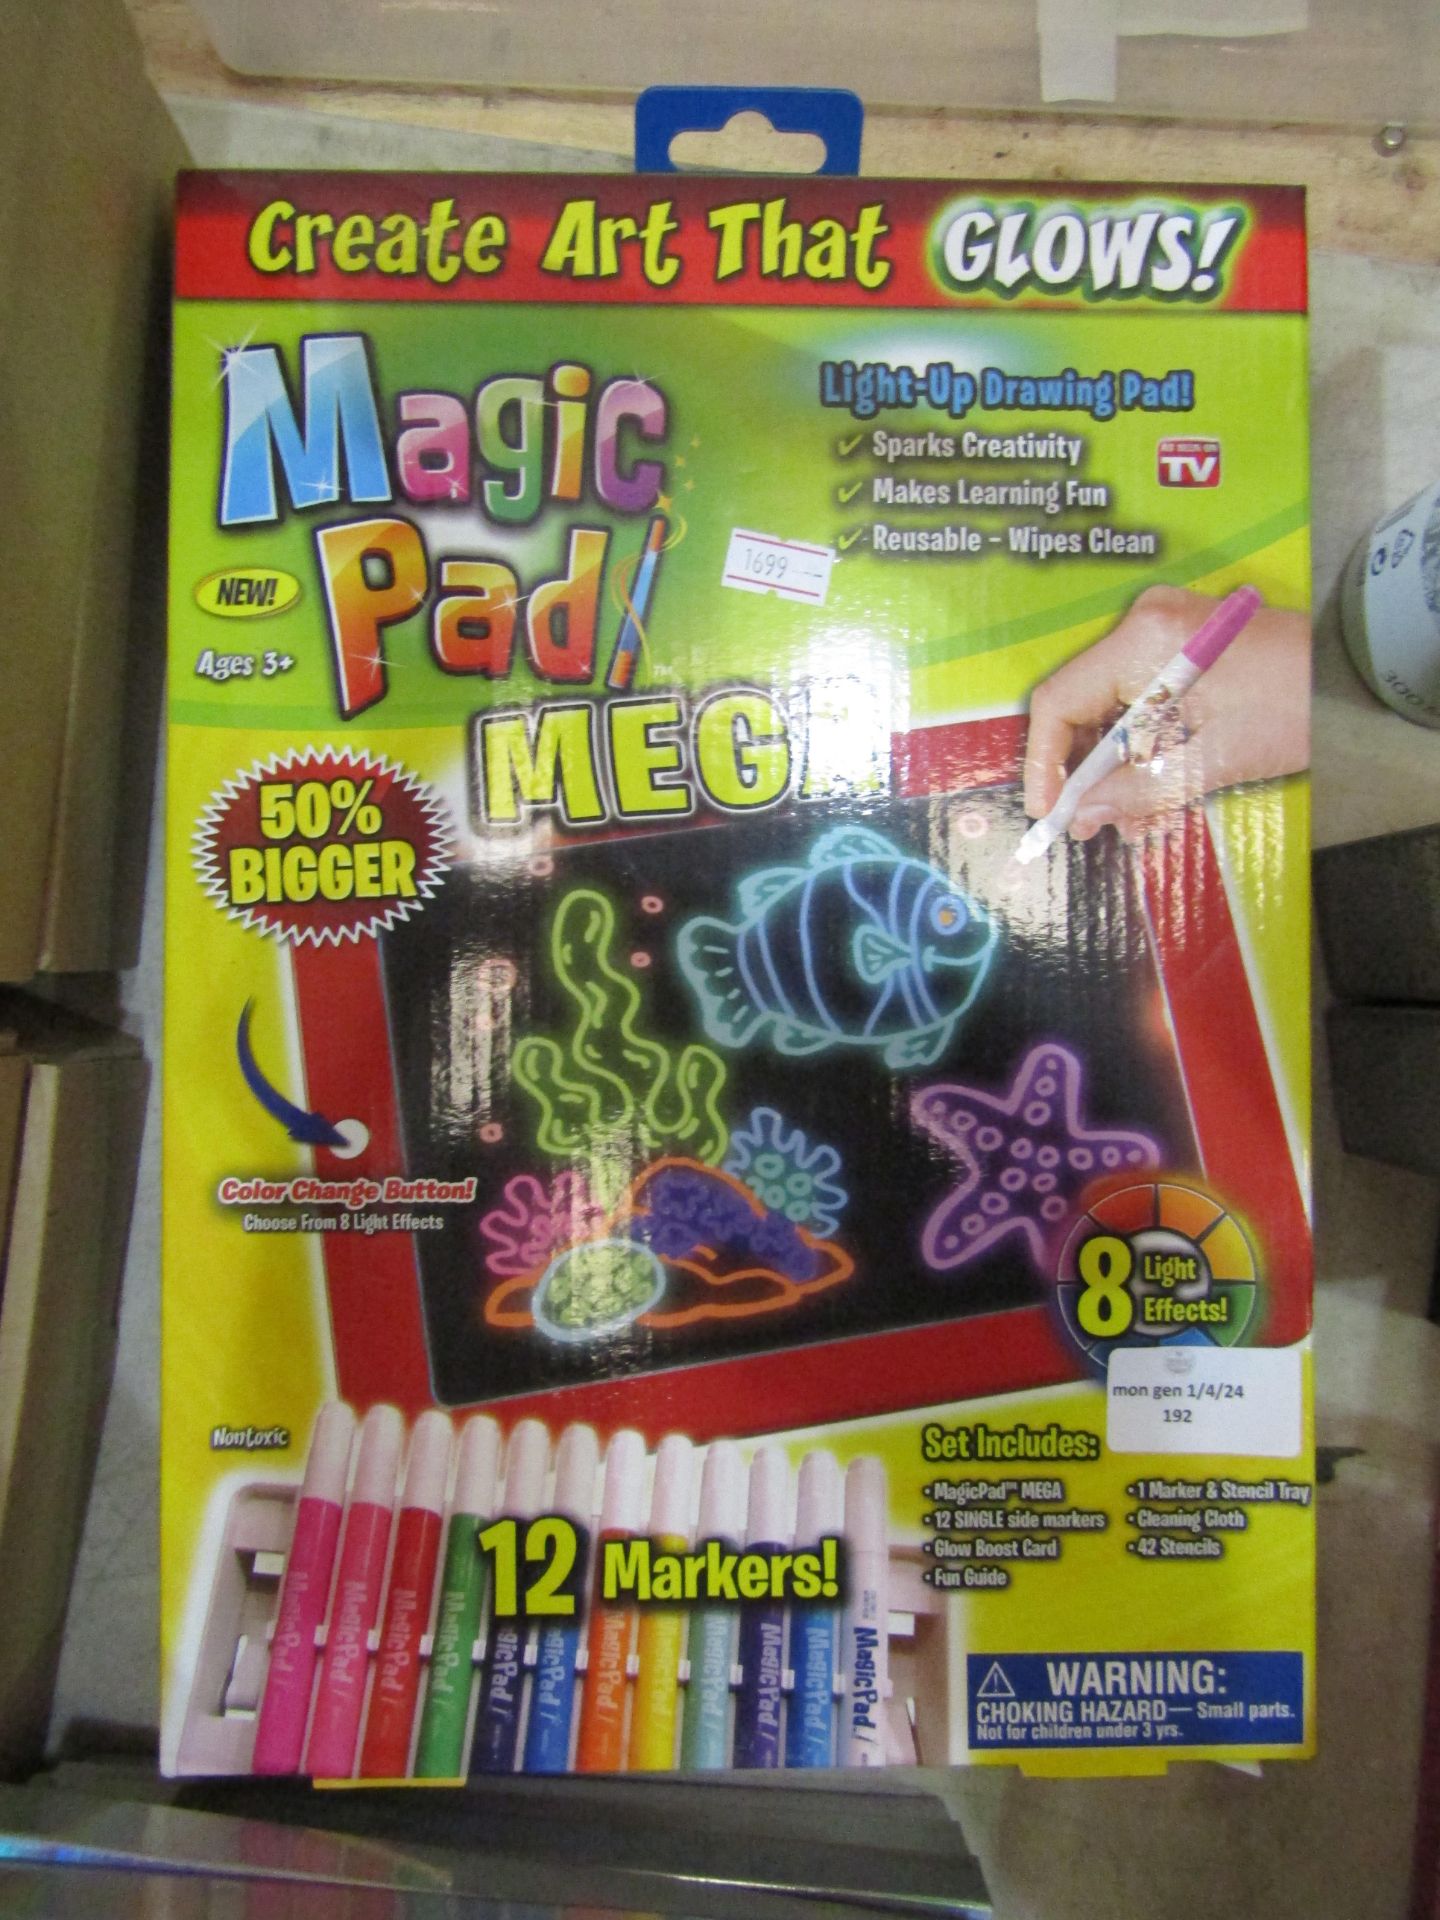 Magic Pad Mega Create Art That Glows! With 12 Markers & 8 Light Affects - Unchecked & Boxed.